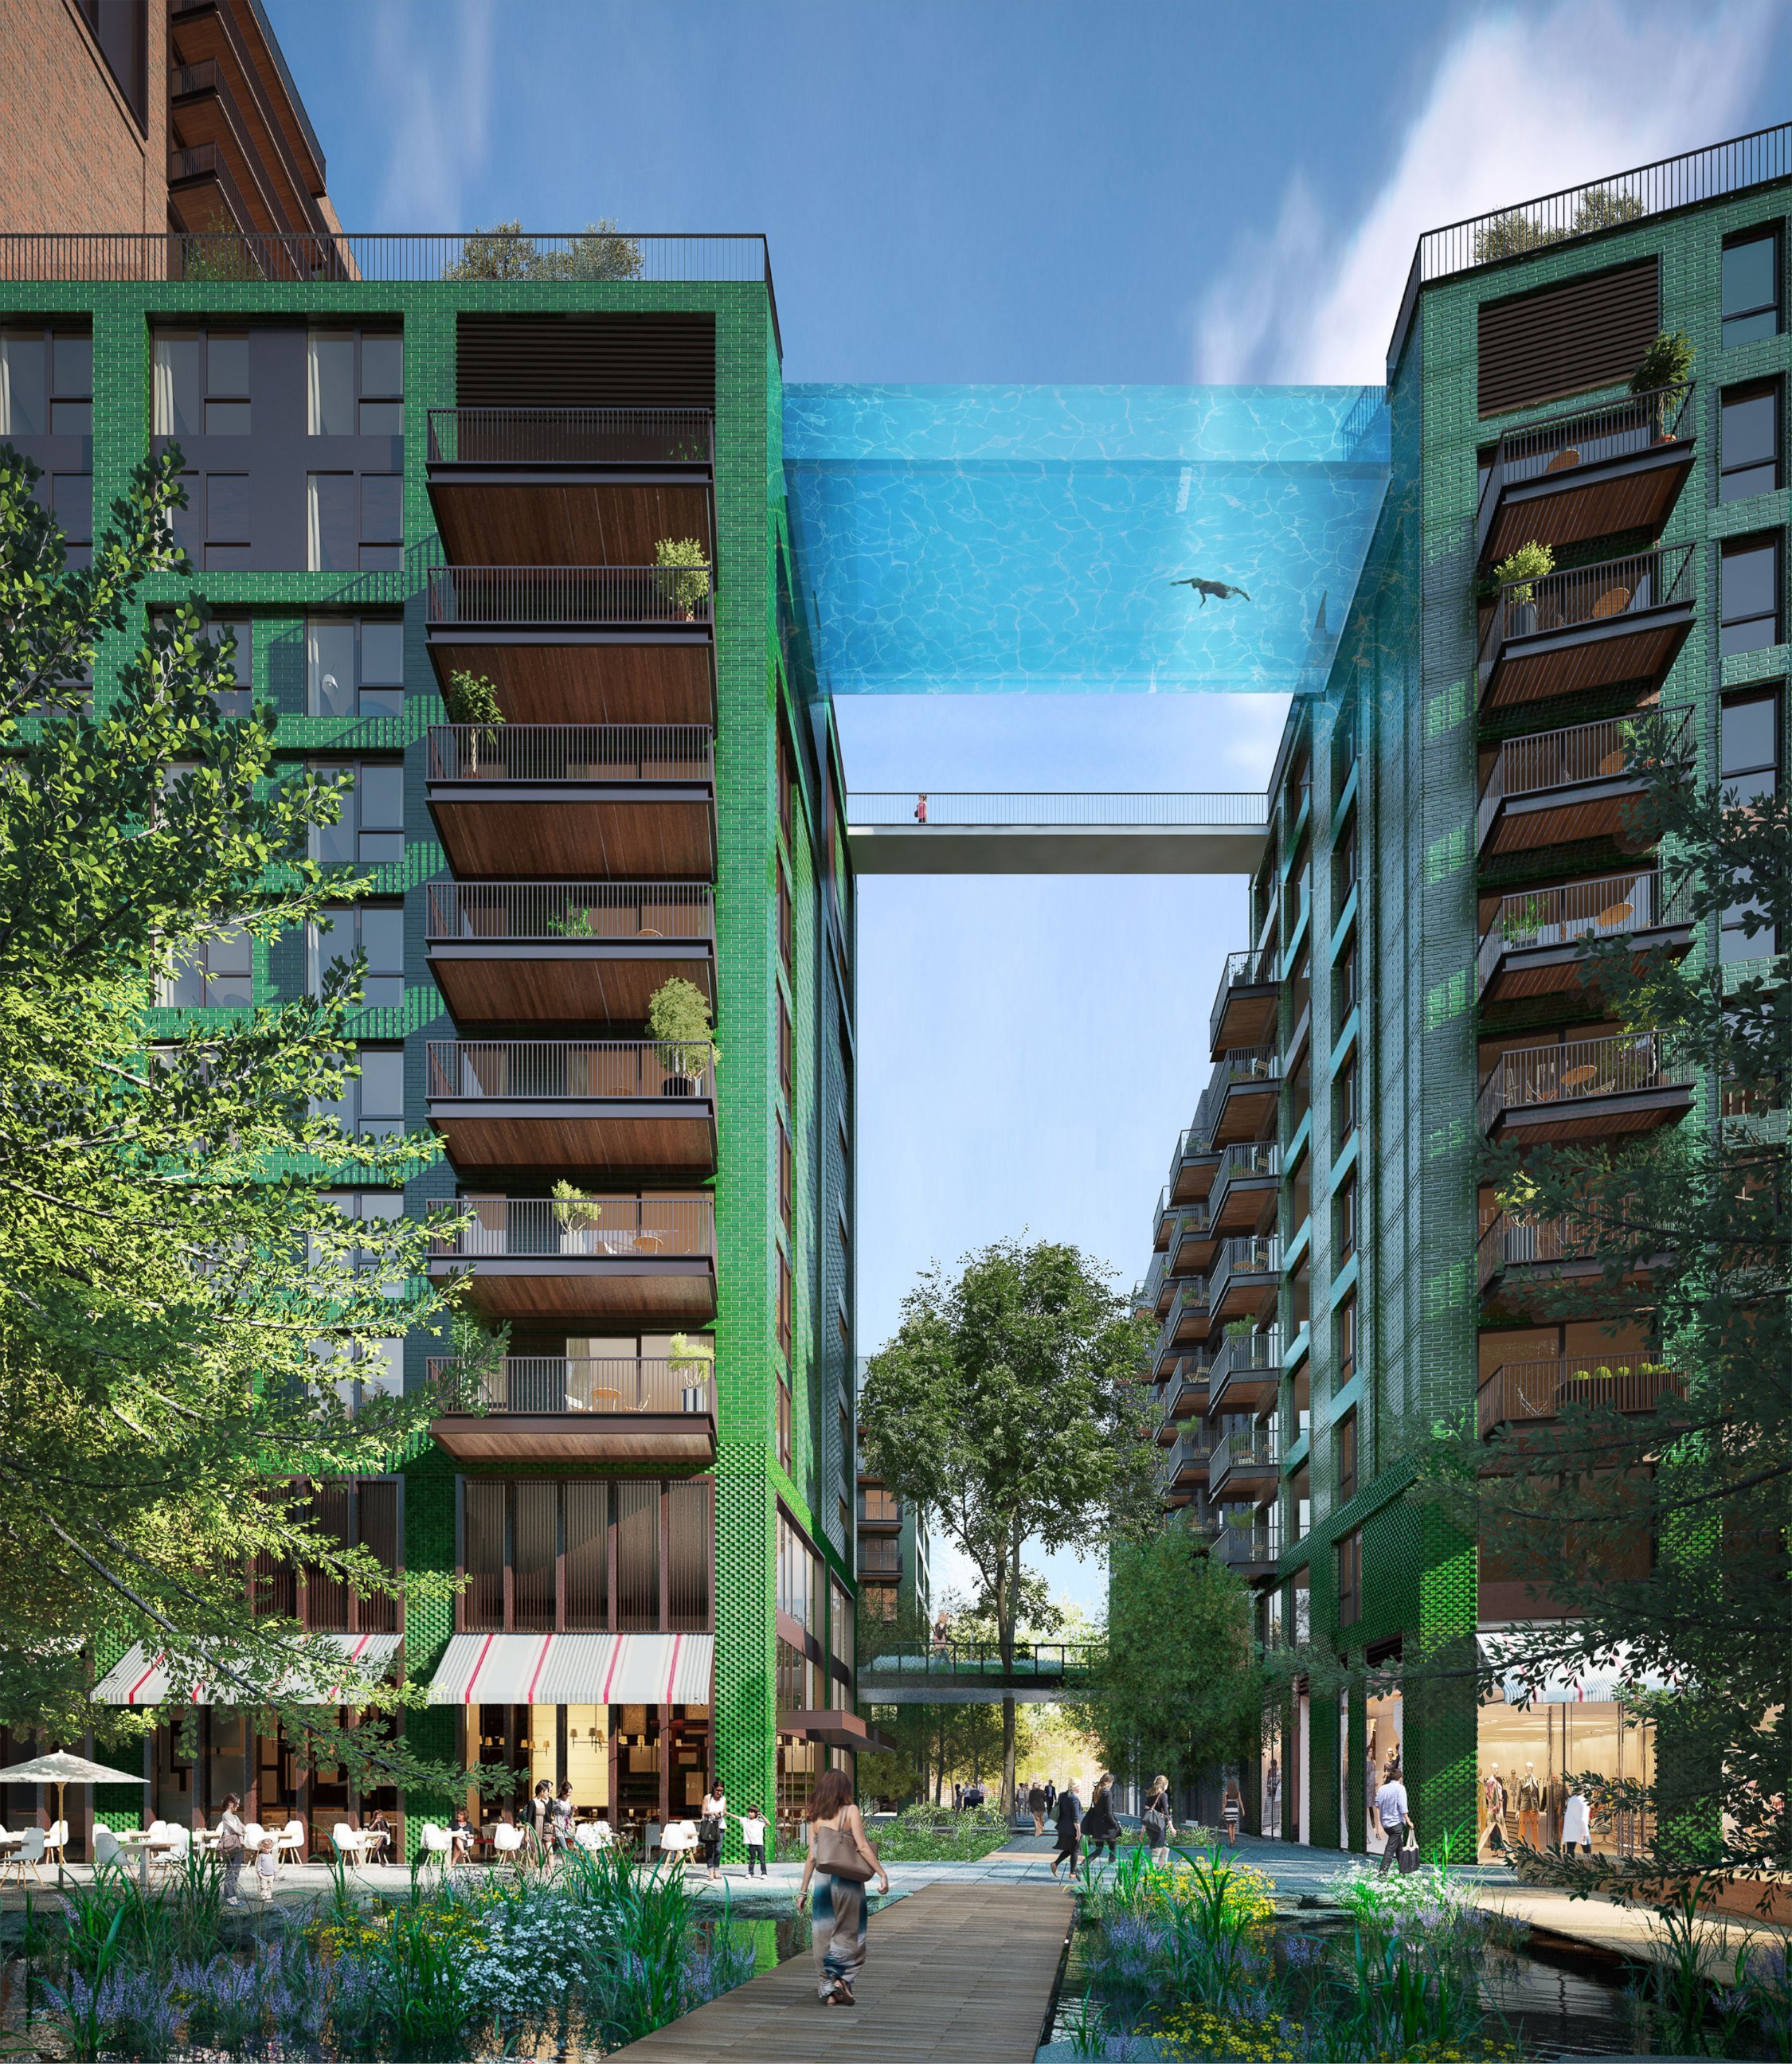 PHOTO: A rendering provided by the developers shows a suspended swimming pool planned for the Embassy Garden development in London.